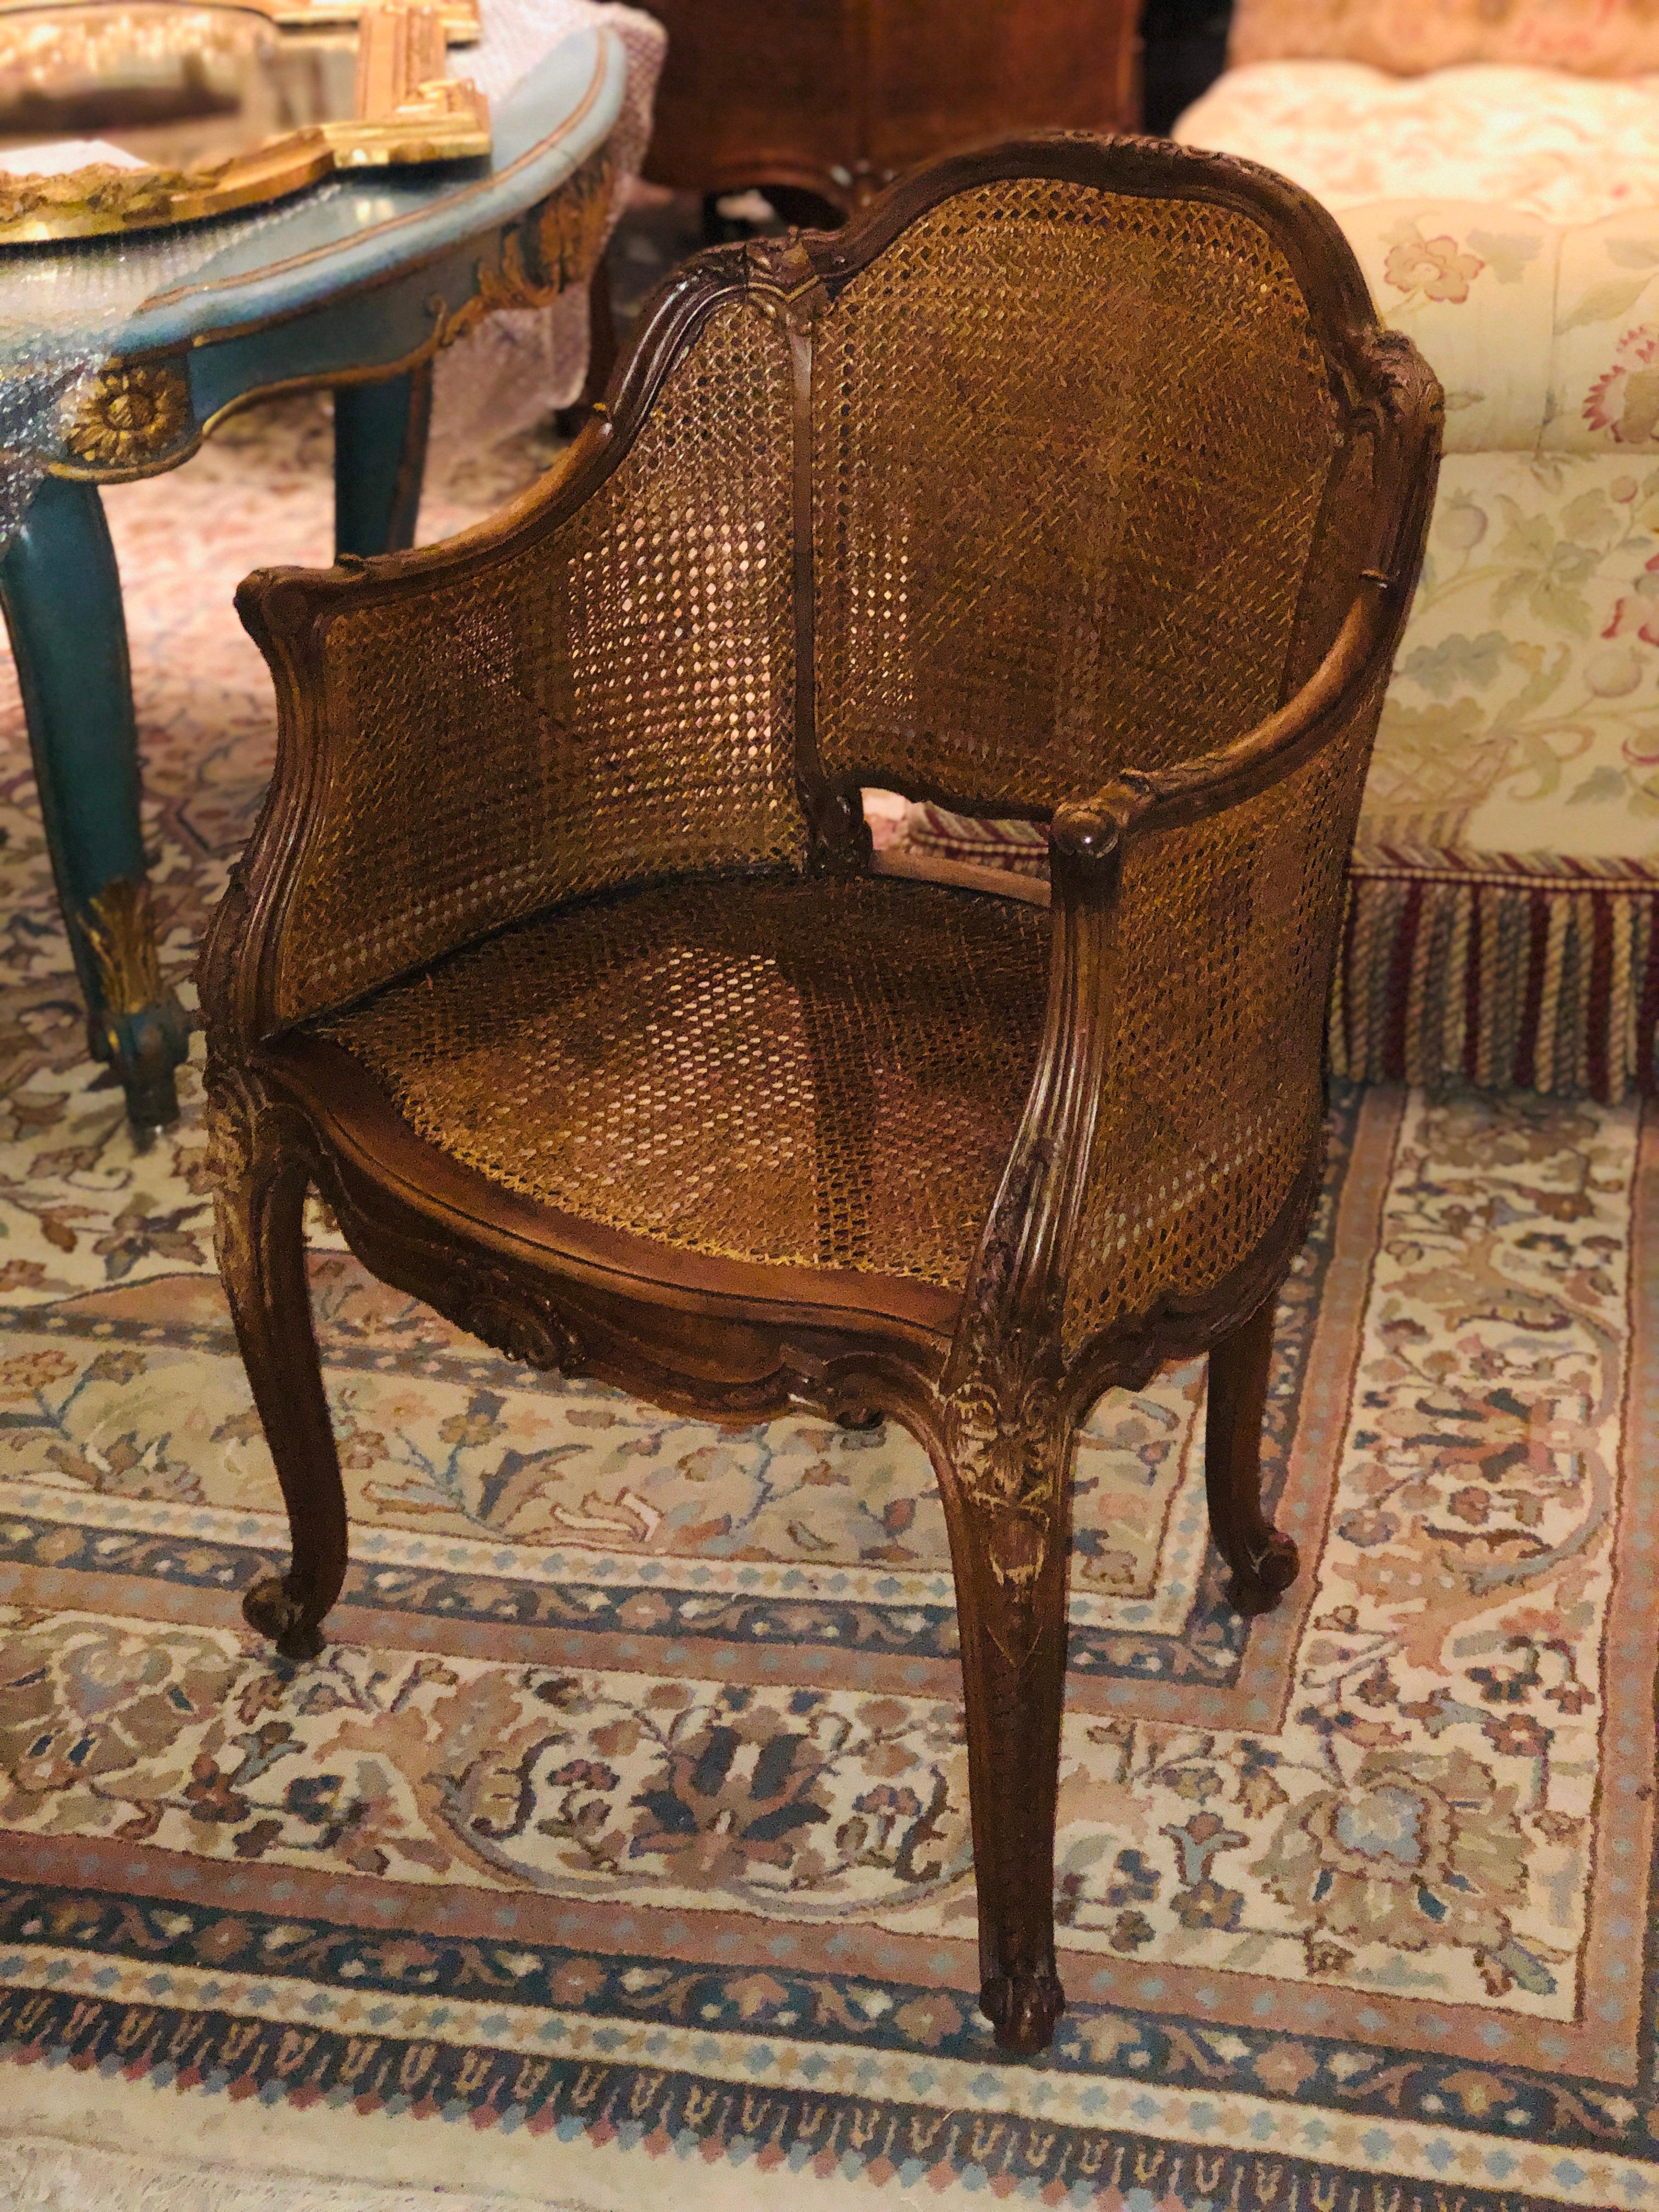 French Louis XV style (19th century) double caned panel hand carved walnut ladies bergère armchair in very good condition.
Very elegant and comfortable piece which could be an accent in any type of interior.
France, circa 1870.